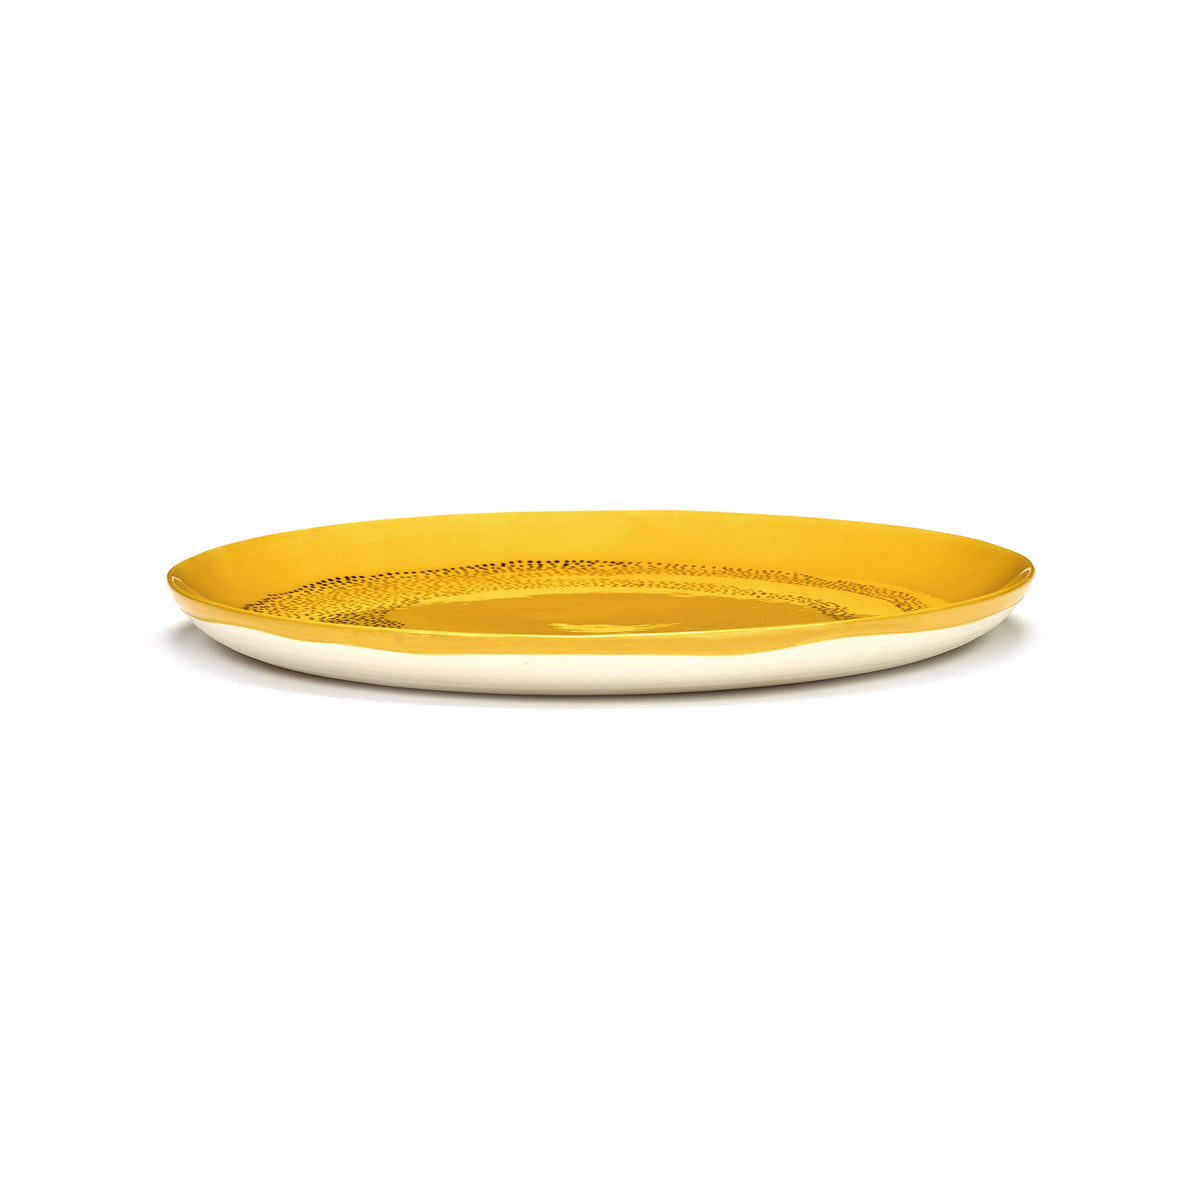 Sunny Yellow Plate with Black Dots - L